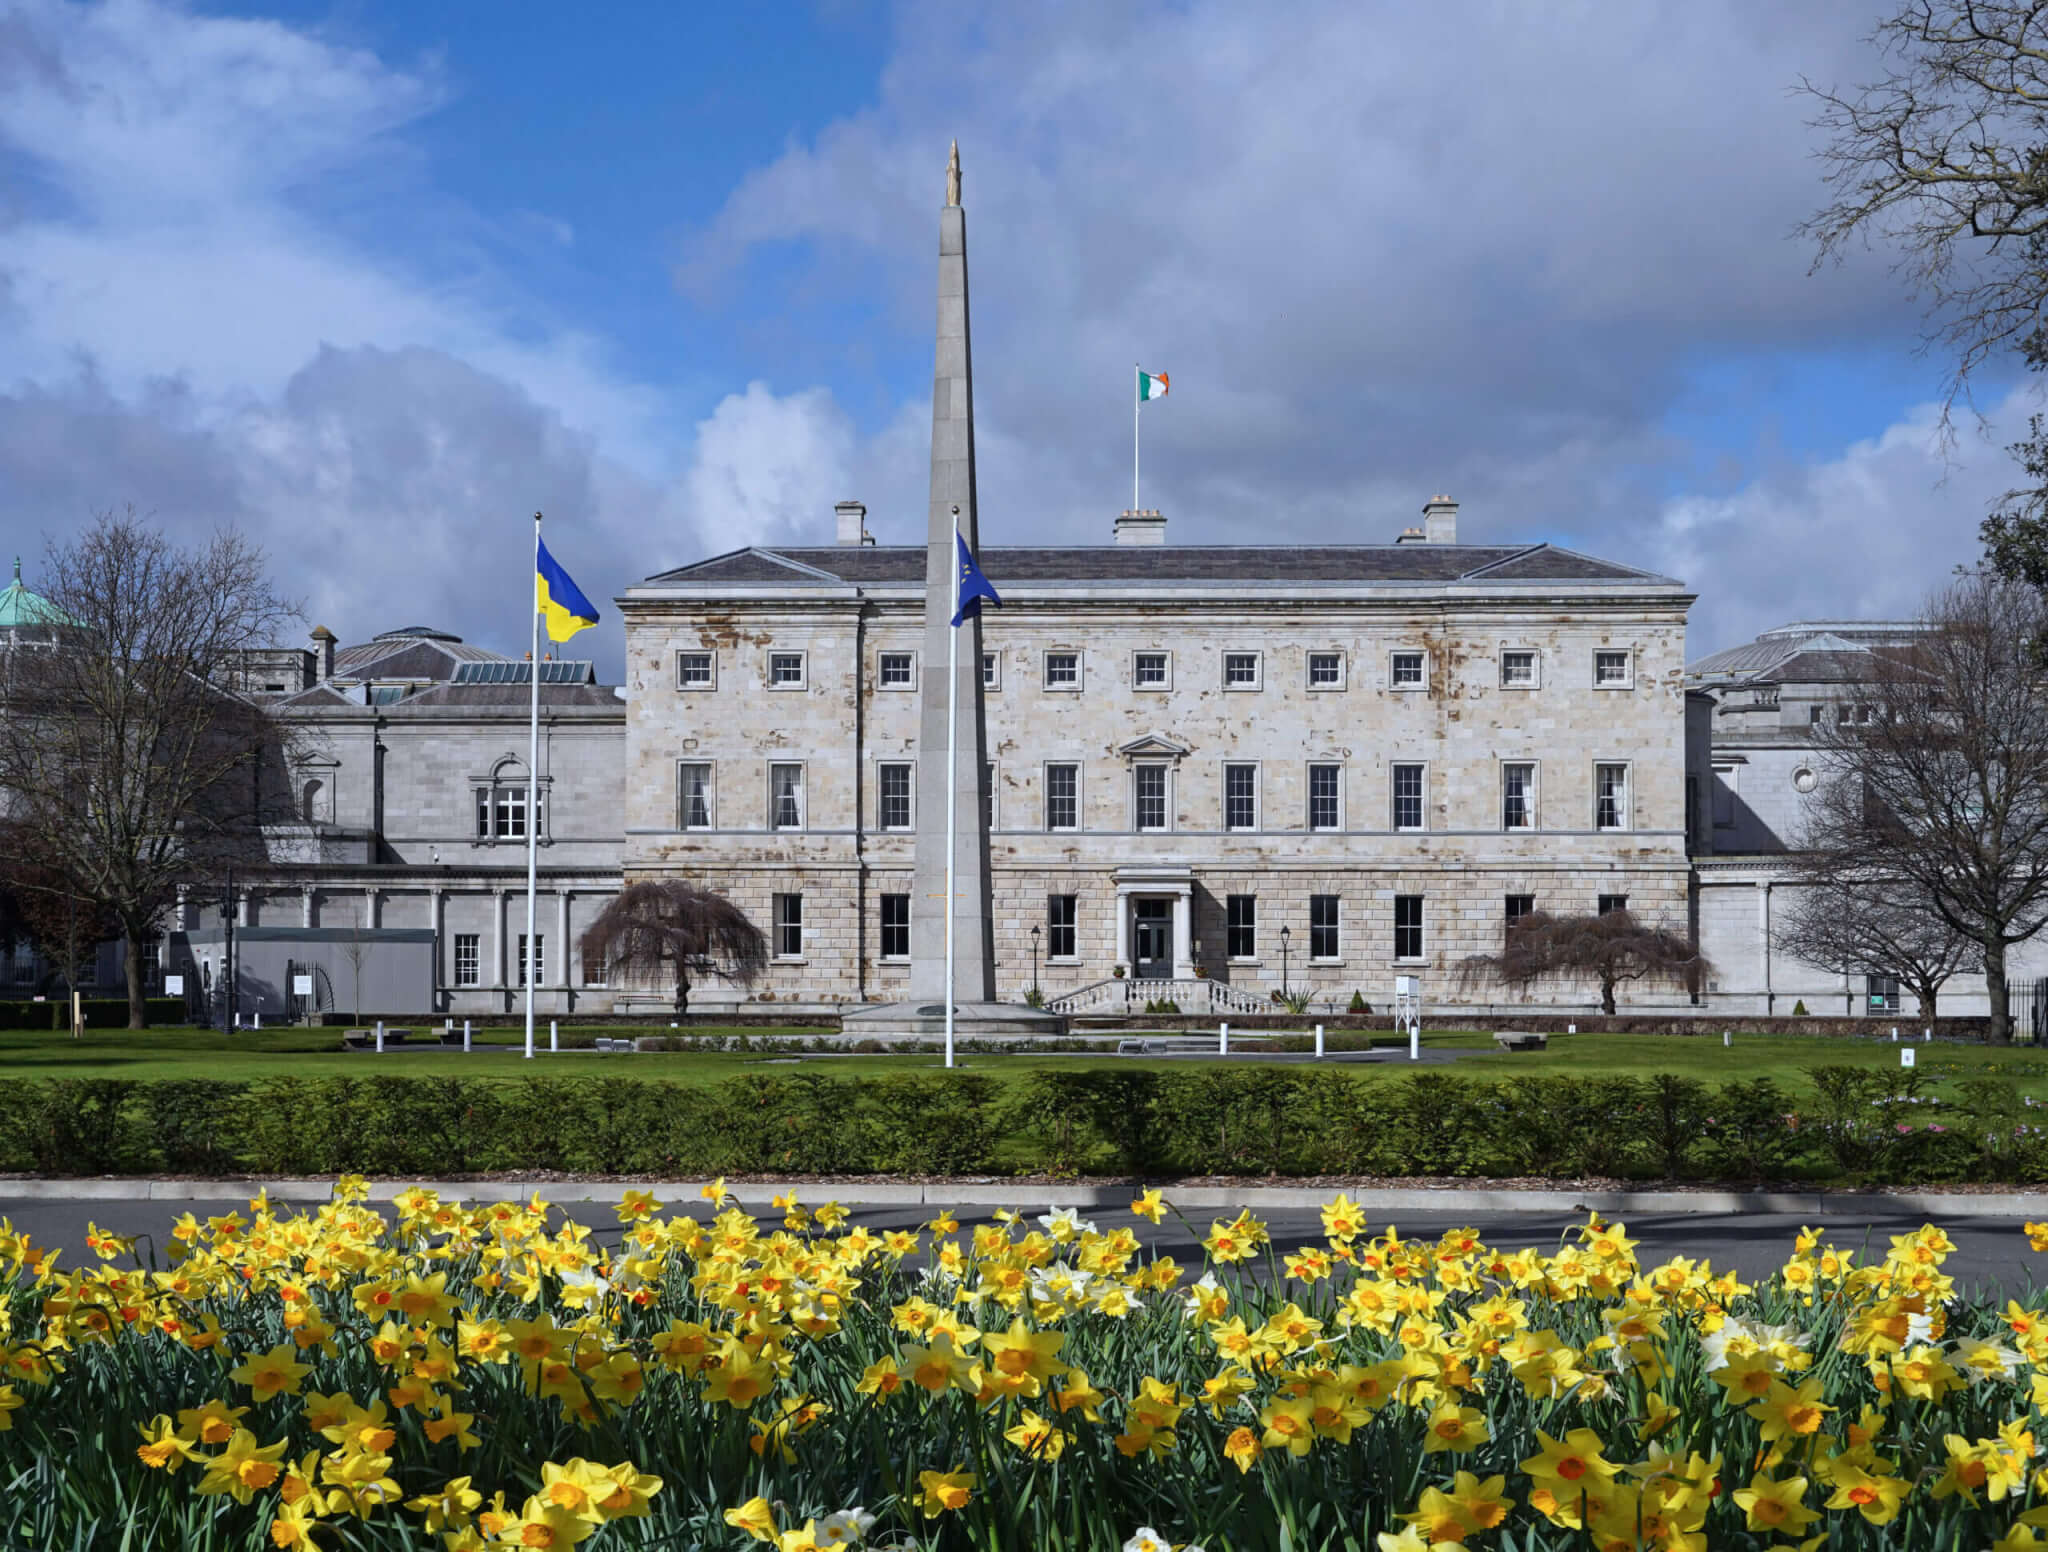 Irish national Parliament Building, Leinster House, viewed from Merrion Square